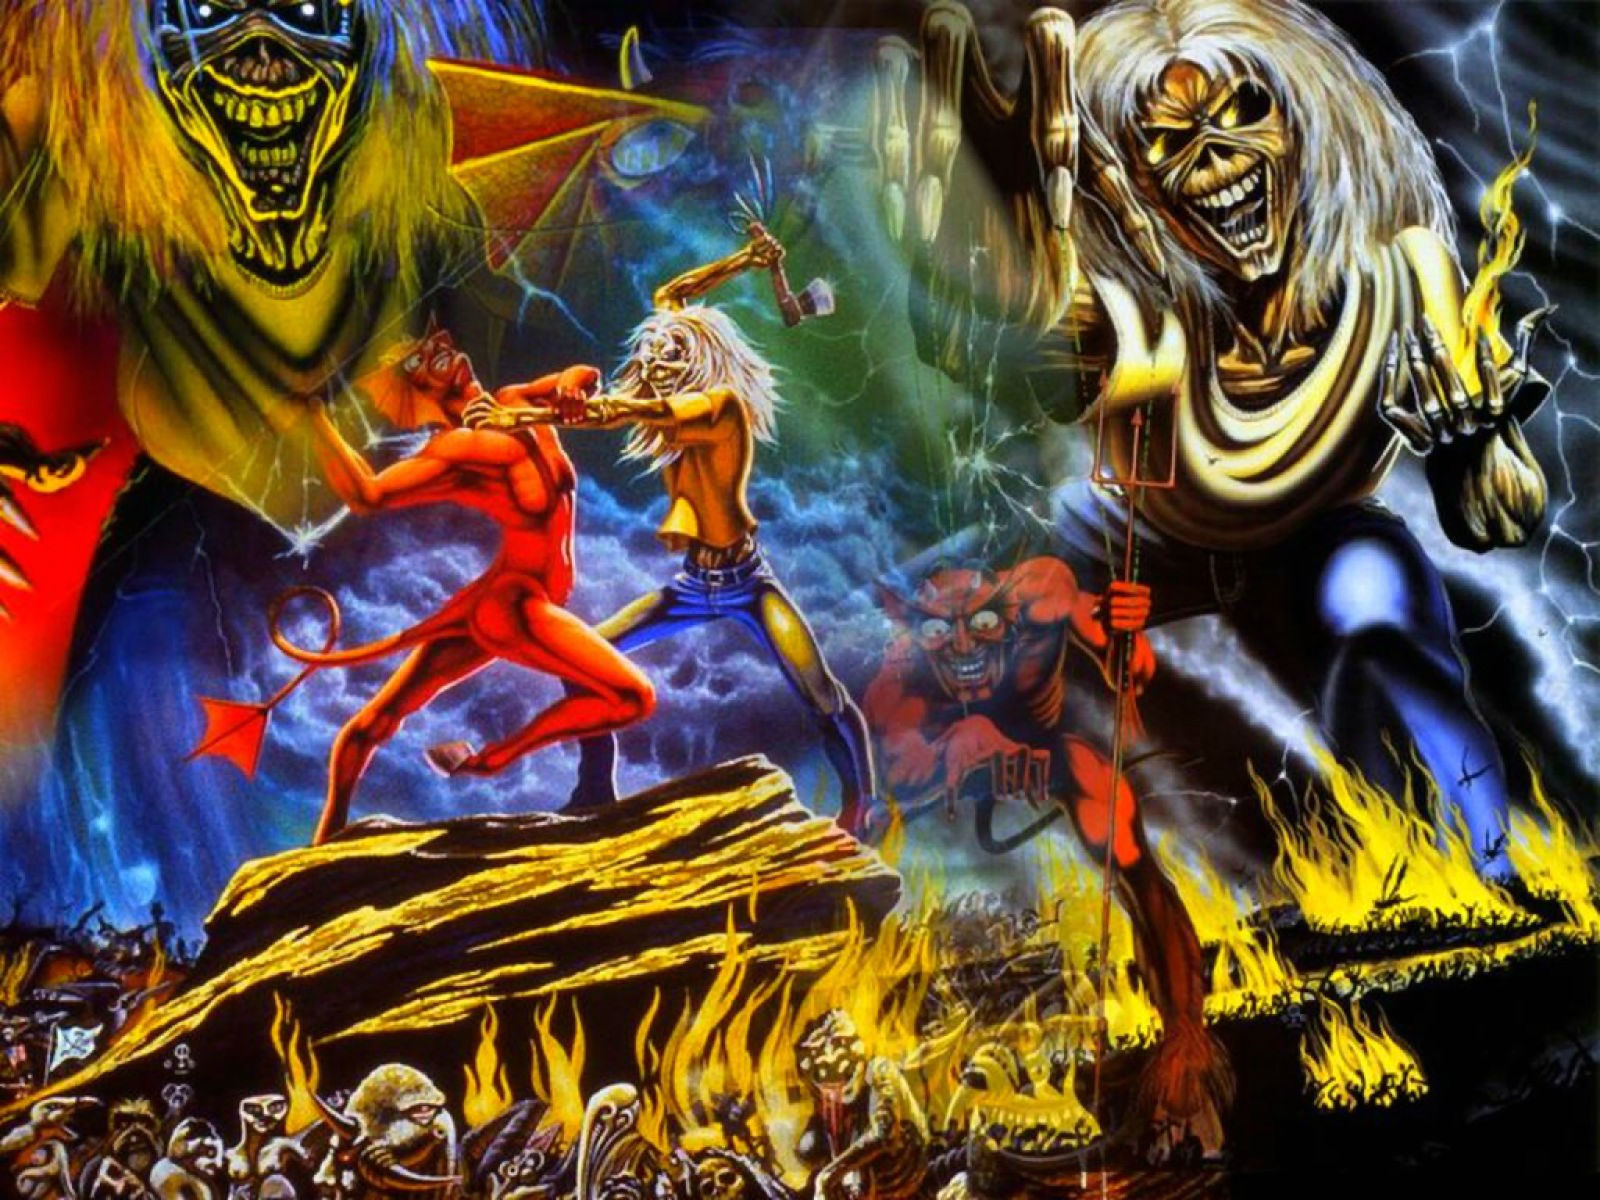 iron maiden, album cover, music, hard rock, heavy metal cell phone wallpapers